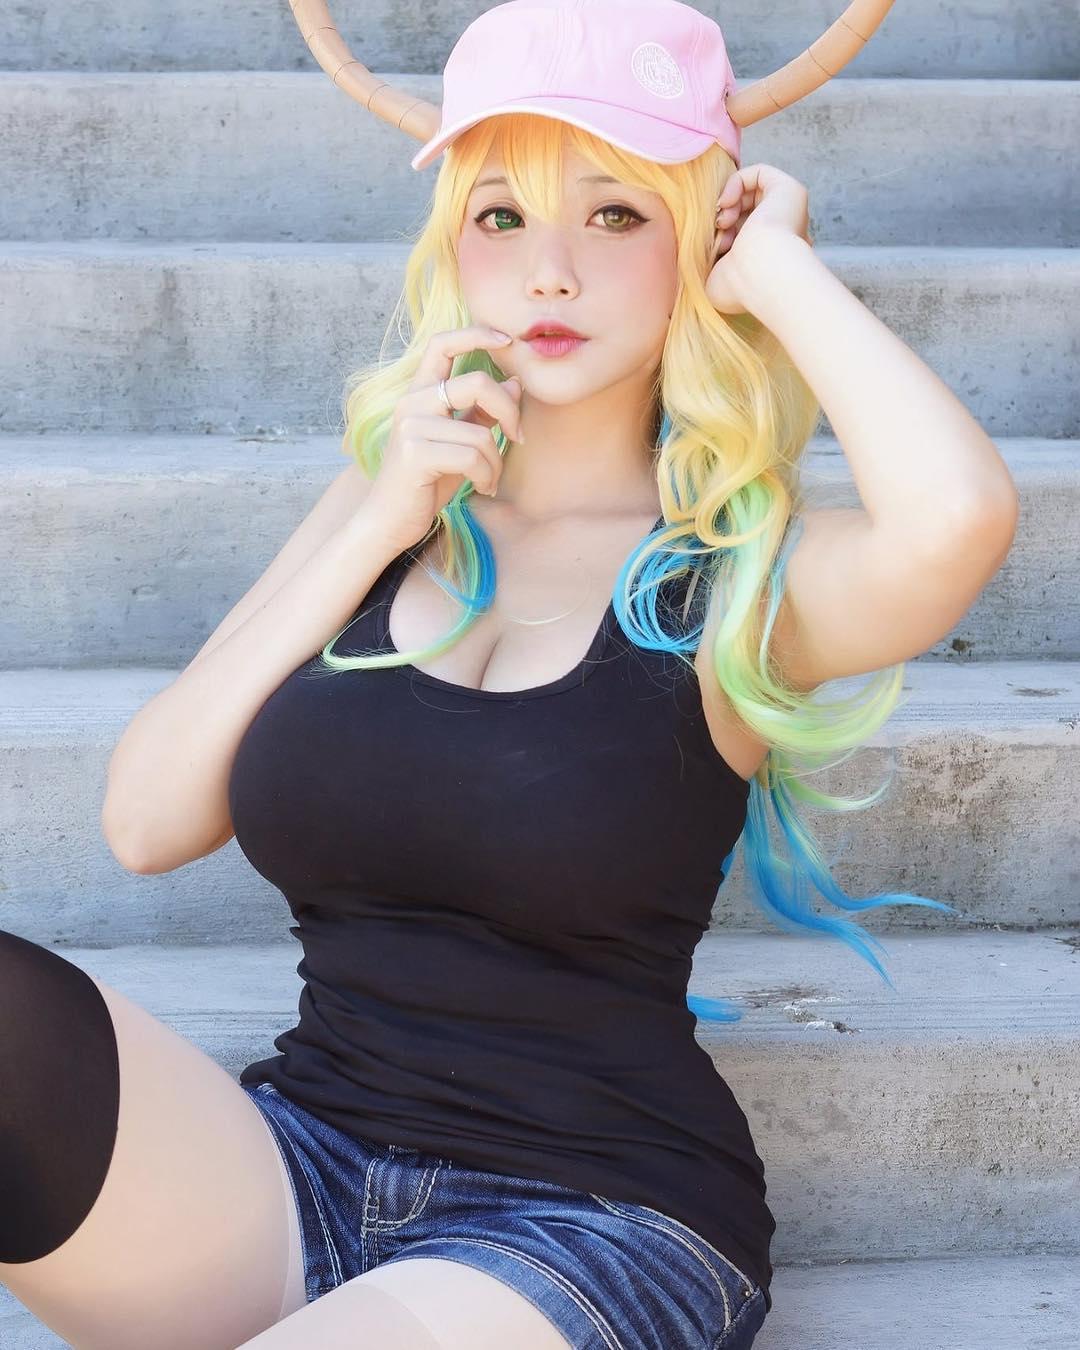 Hana Bunny Cute Cosplay Picture and Photo